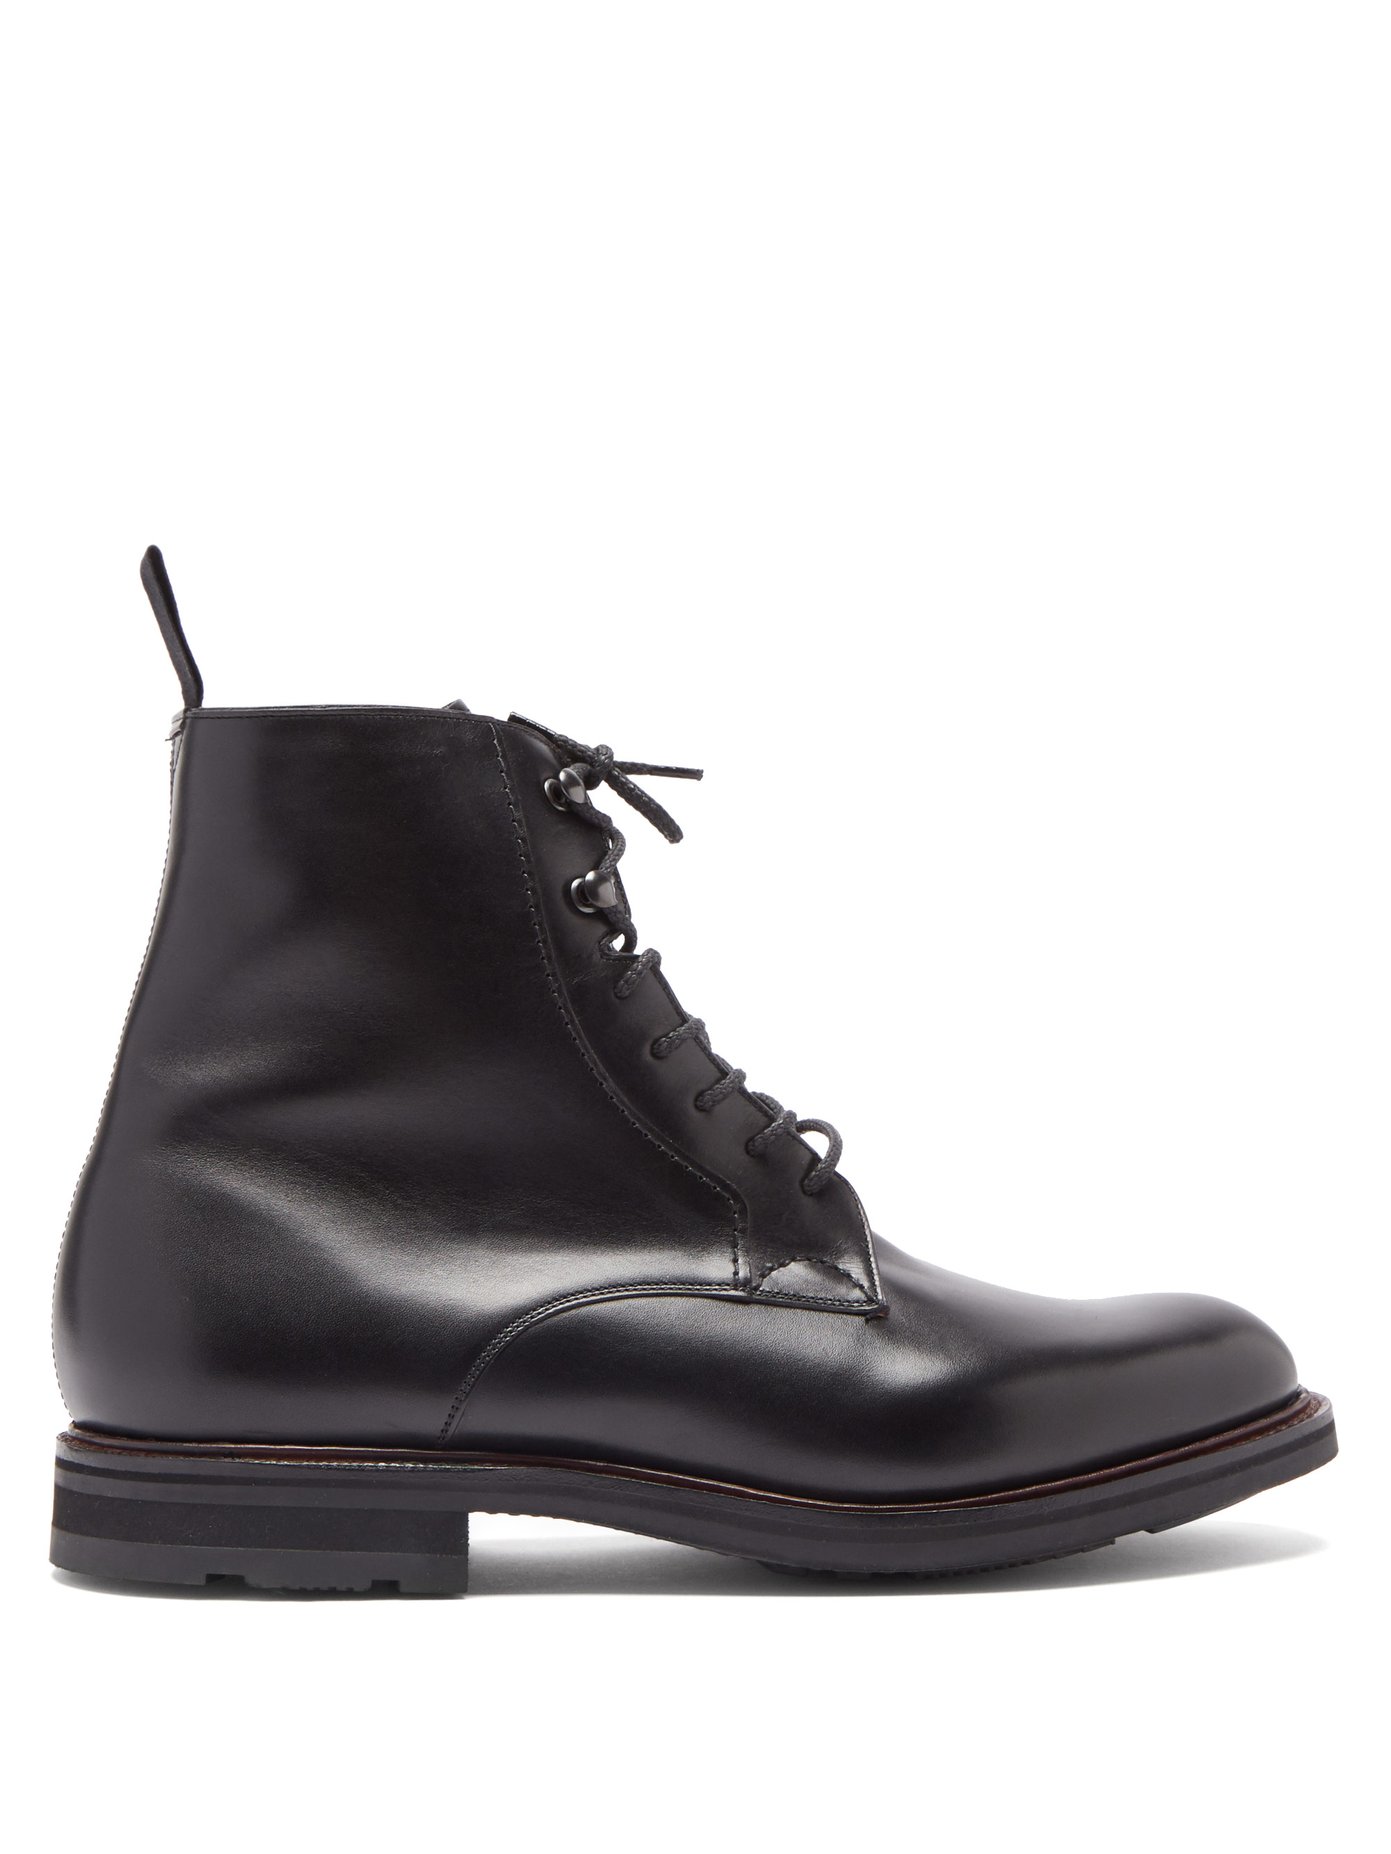 church's lace up boots